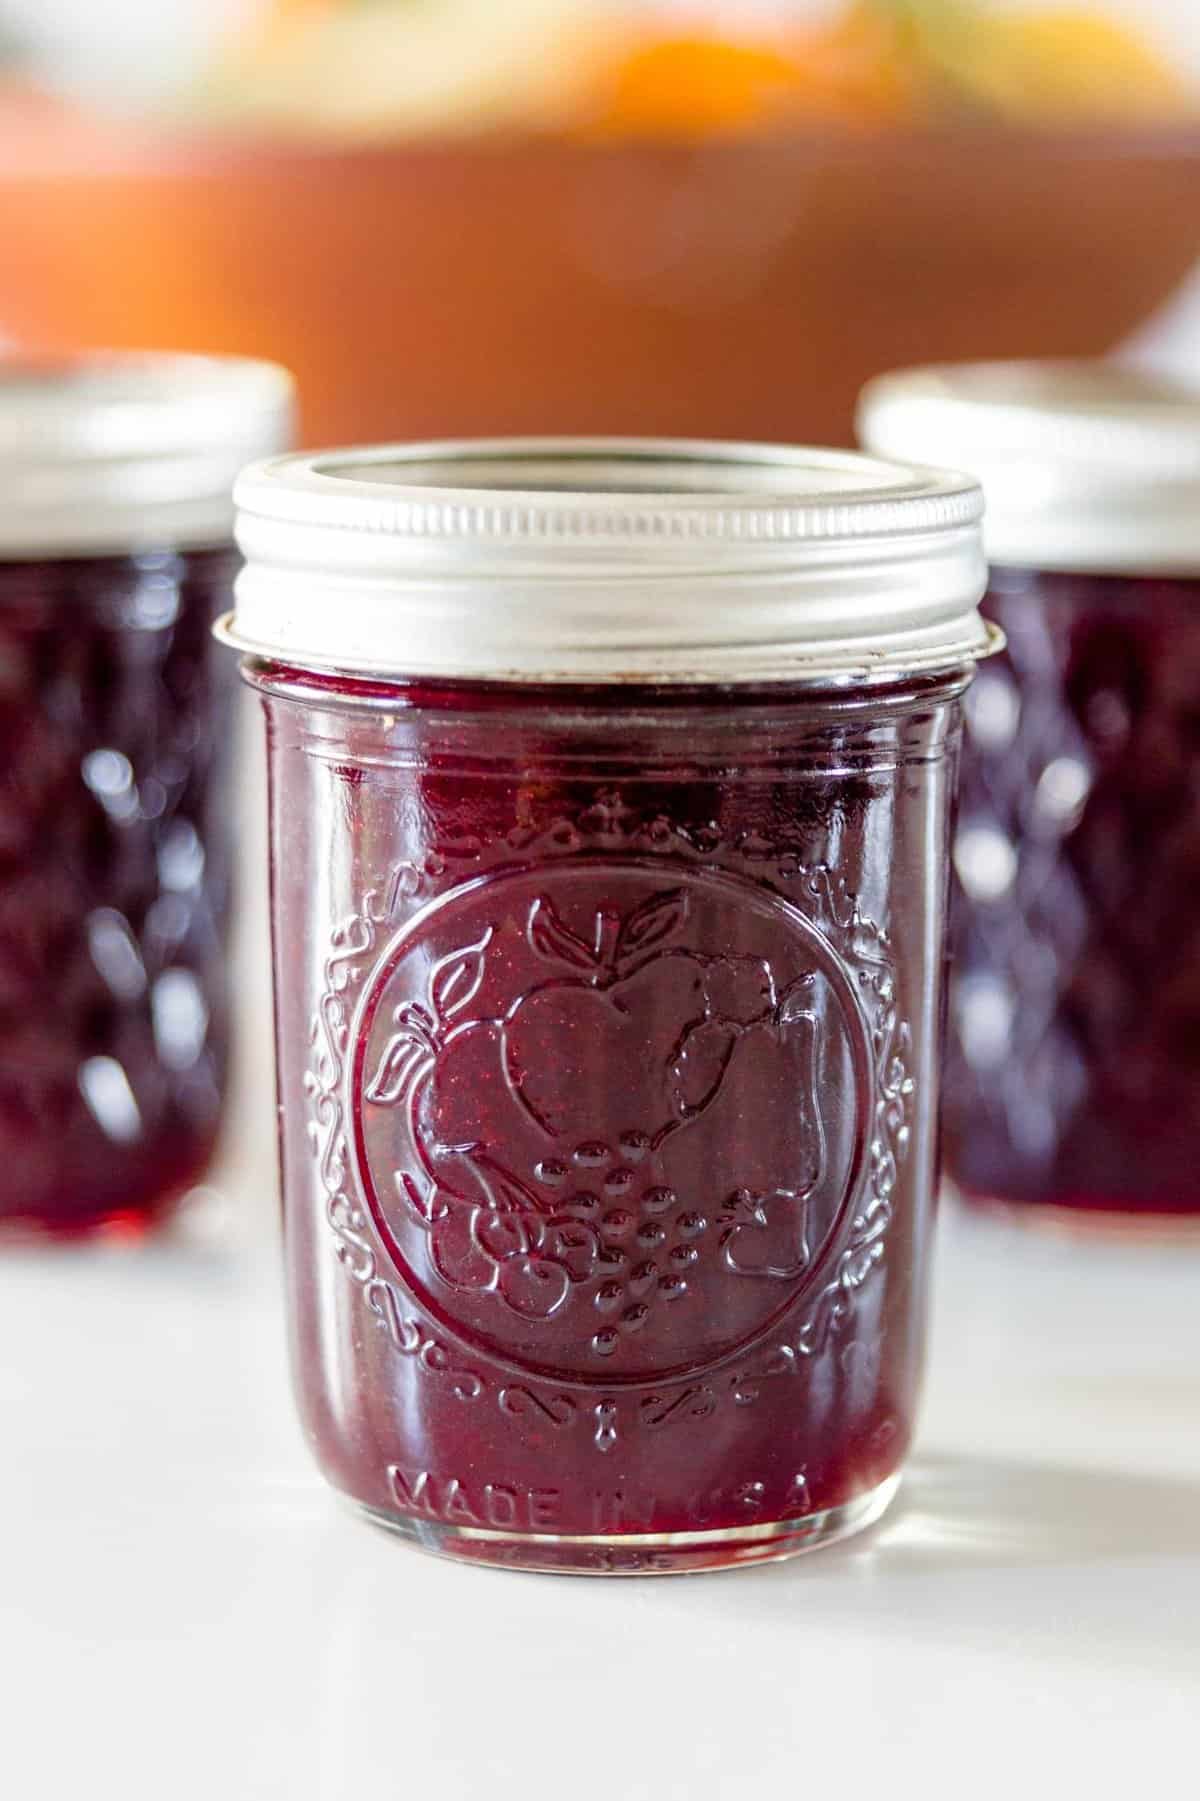  This grape butter is so delicious, you'll want to eat it straight out of the jar.